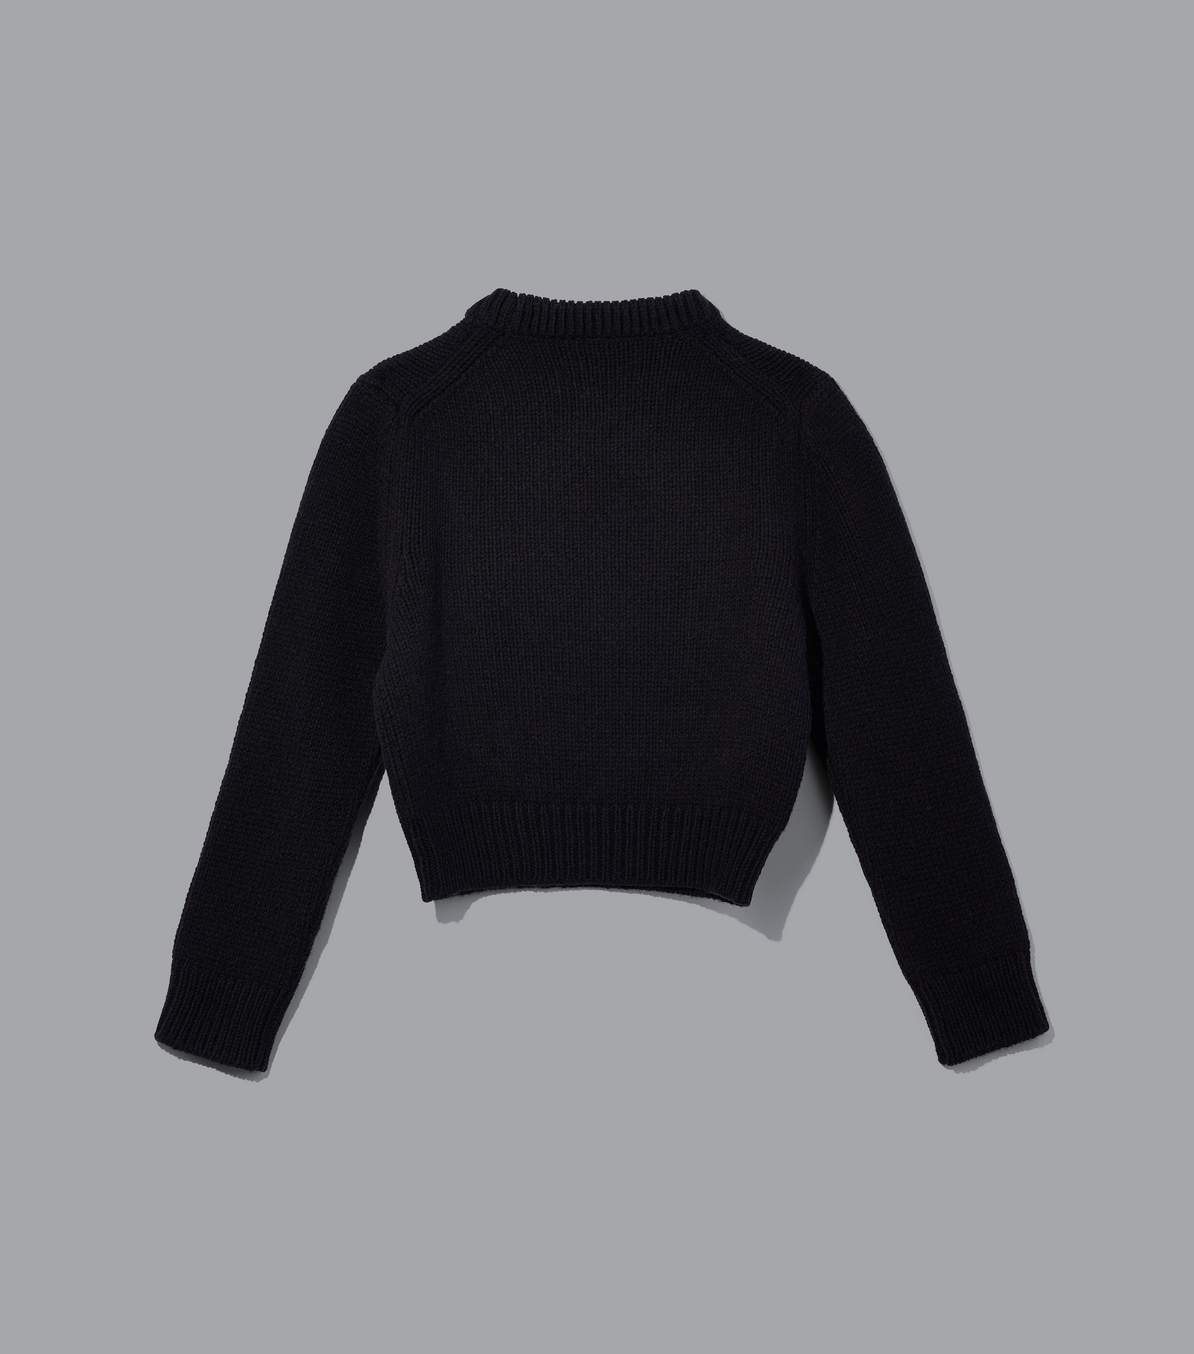 The Shrunken Sweater | Marc Jacobs | Official Site